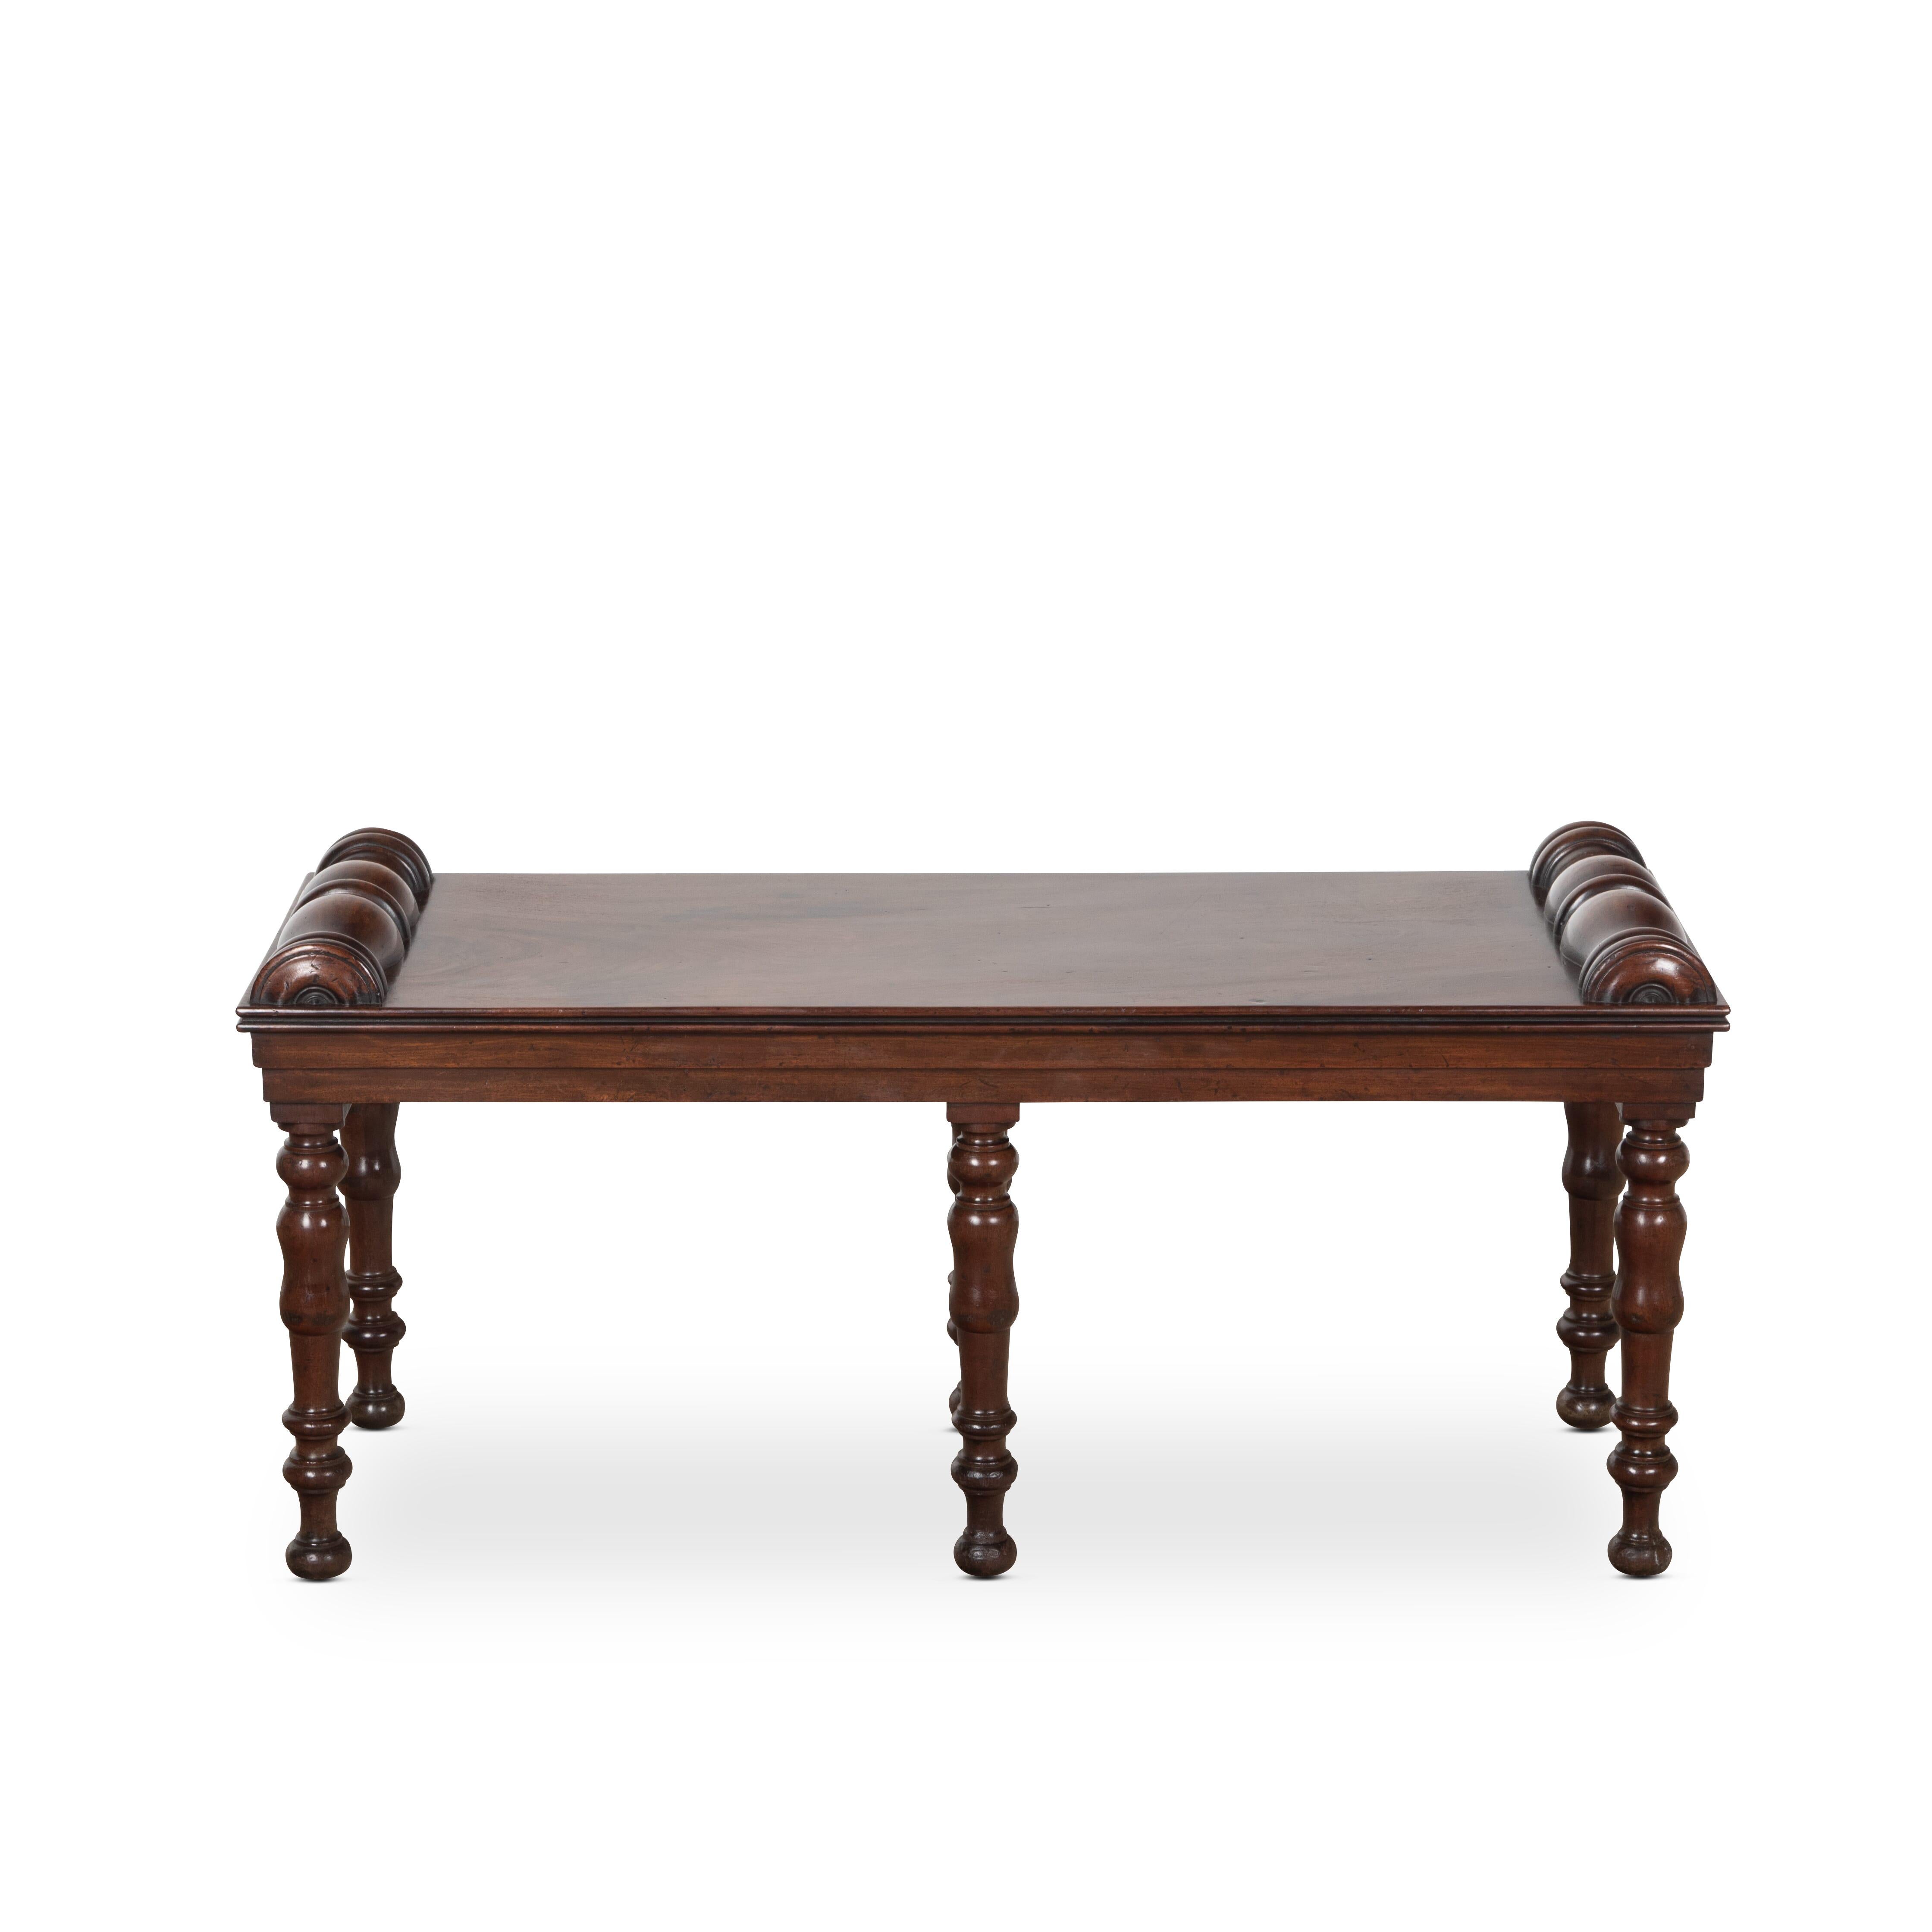 Regency Mahogany Hall Bench In Good Condition For Sale In Shipston-On-Stour, GB